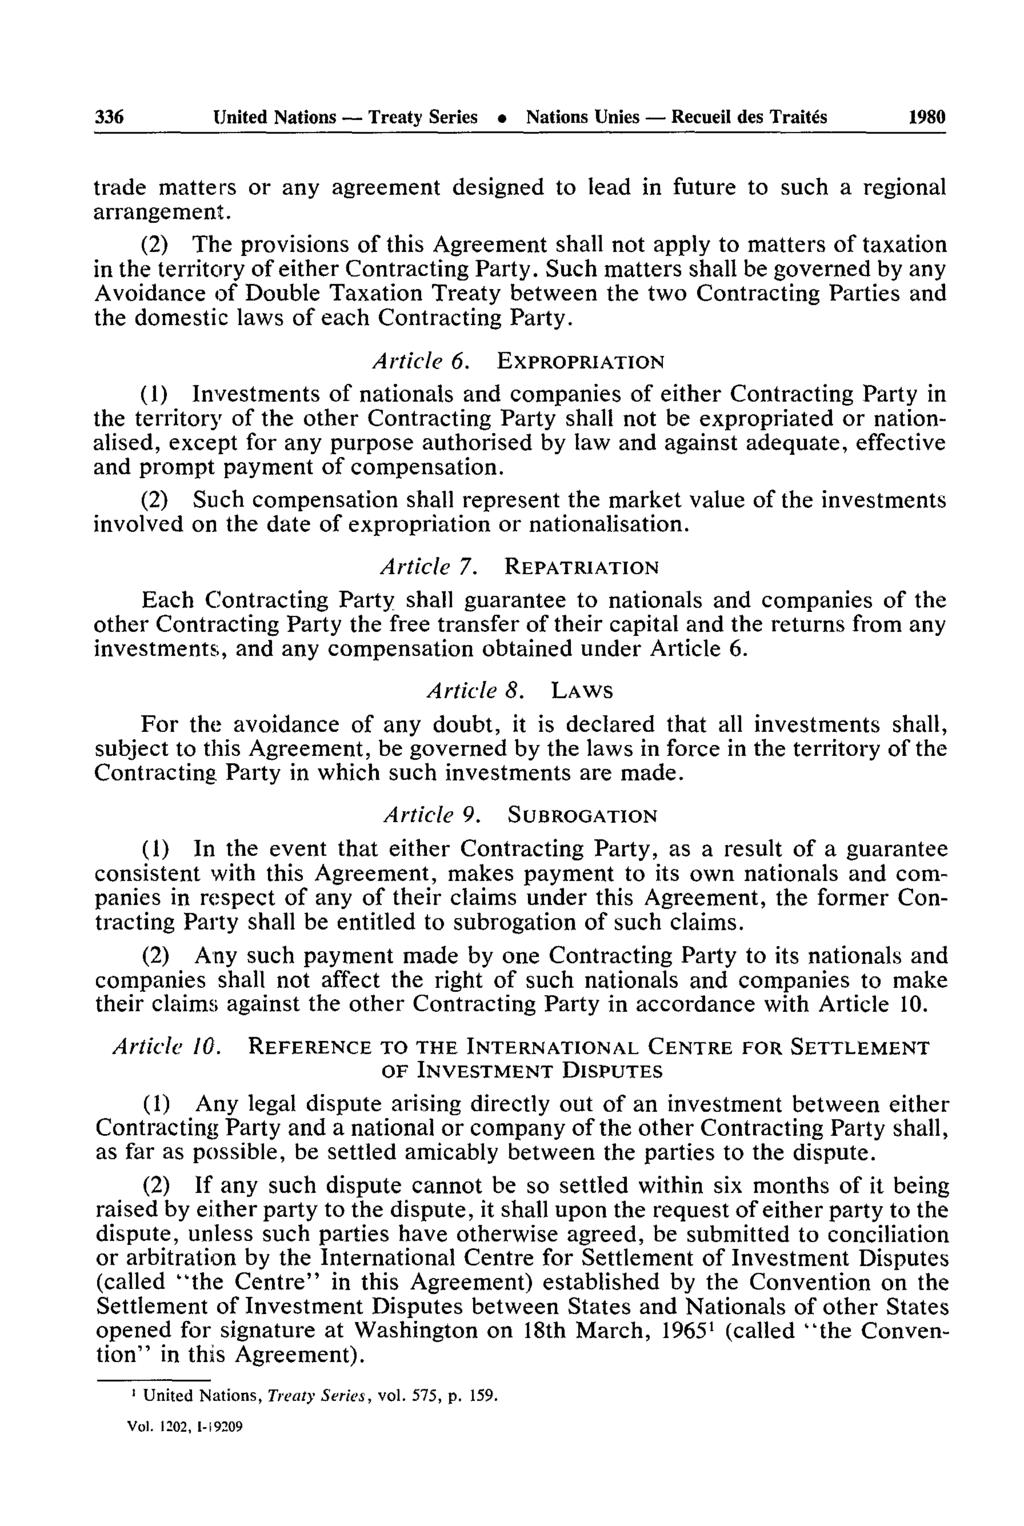 336 United Nations - Treaty Series Nations Unies - Recueil des Traites 1980 trade matters or any agreement designed to lead in future to such a regional arrangement.